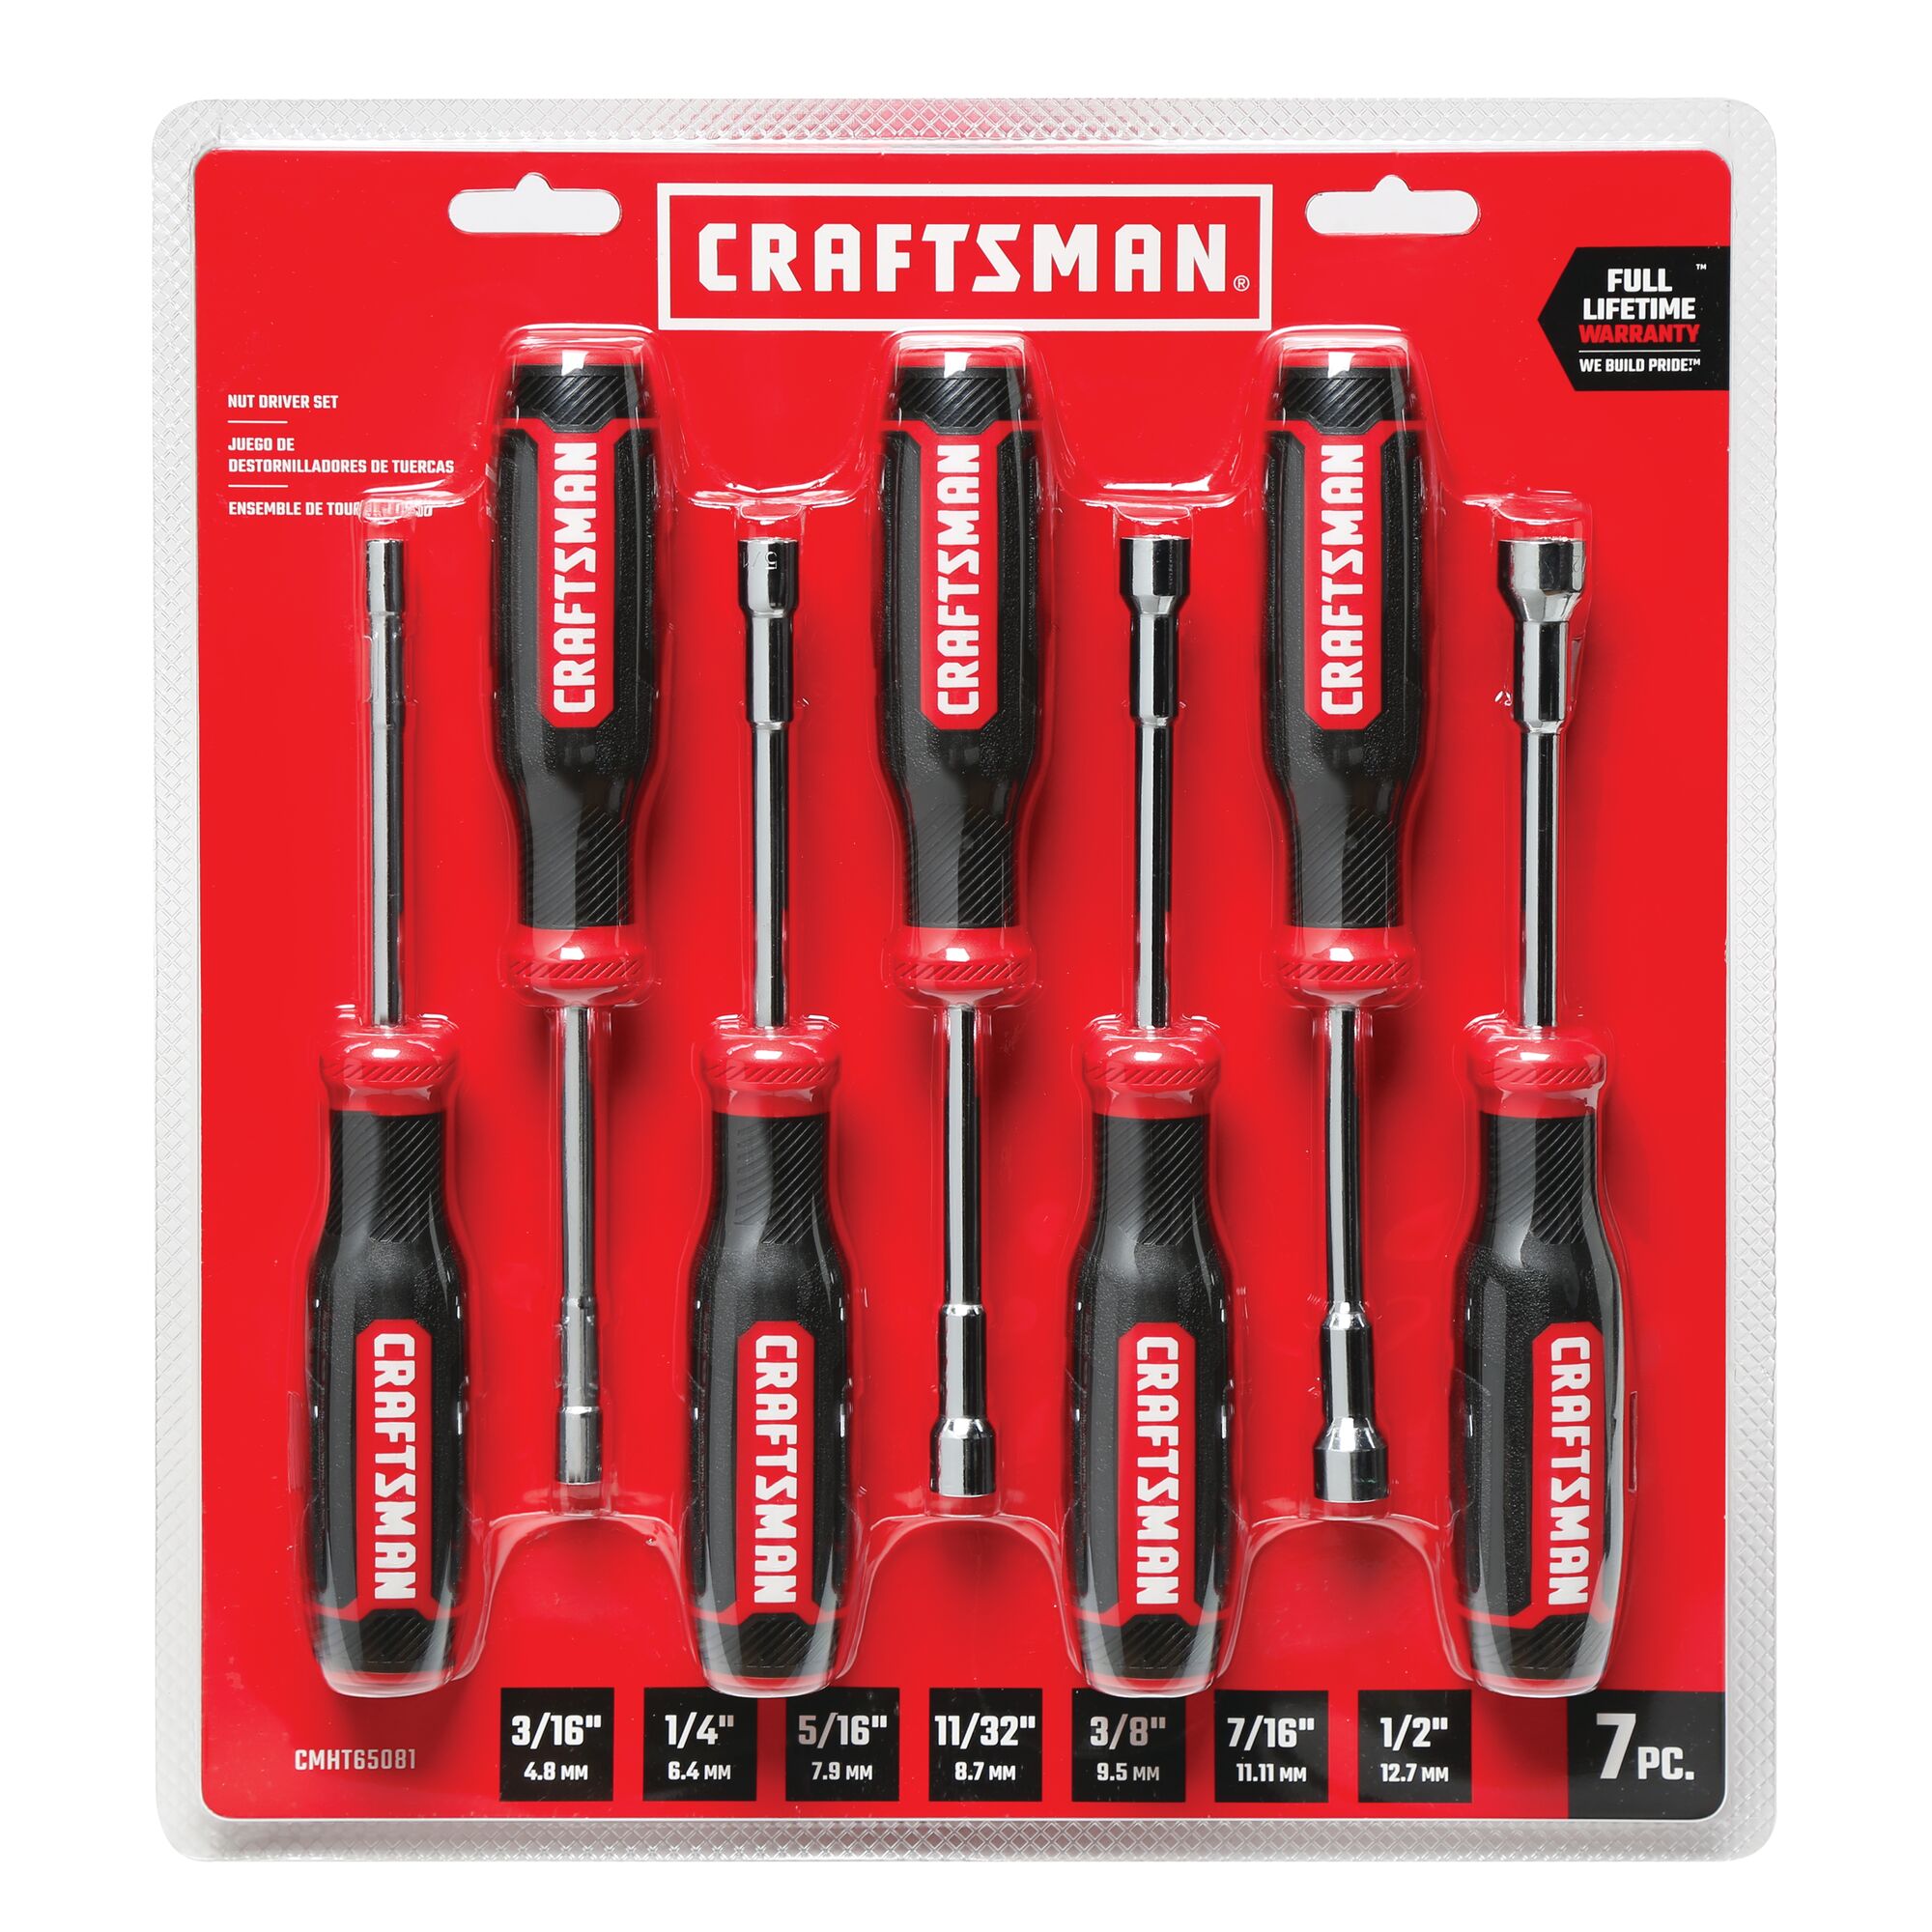 View of CRAFTSMAN Accessories: Nut Drivers packaging